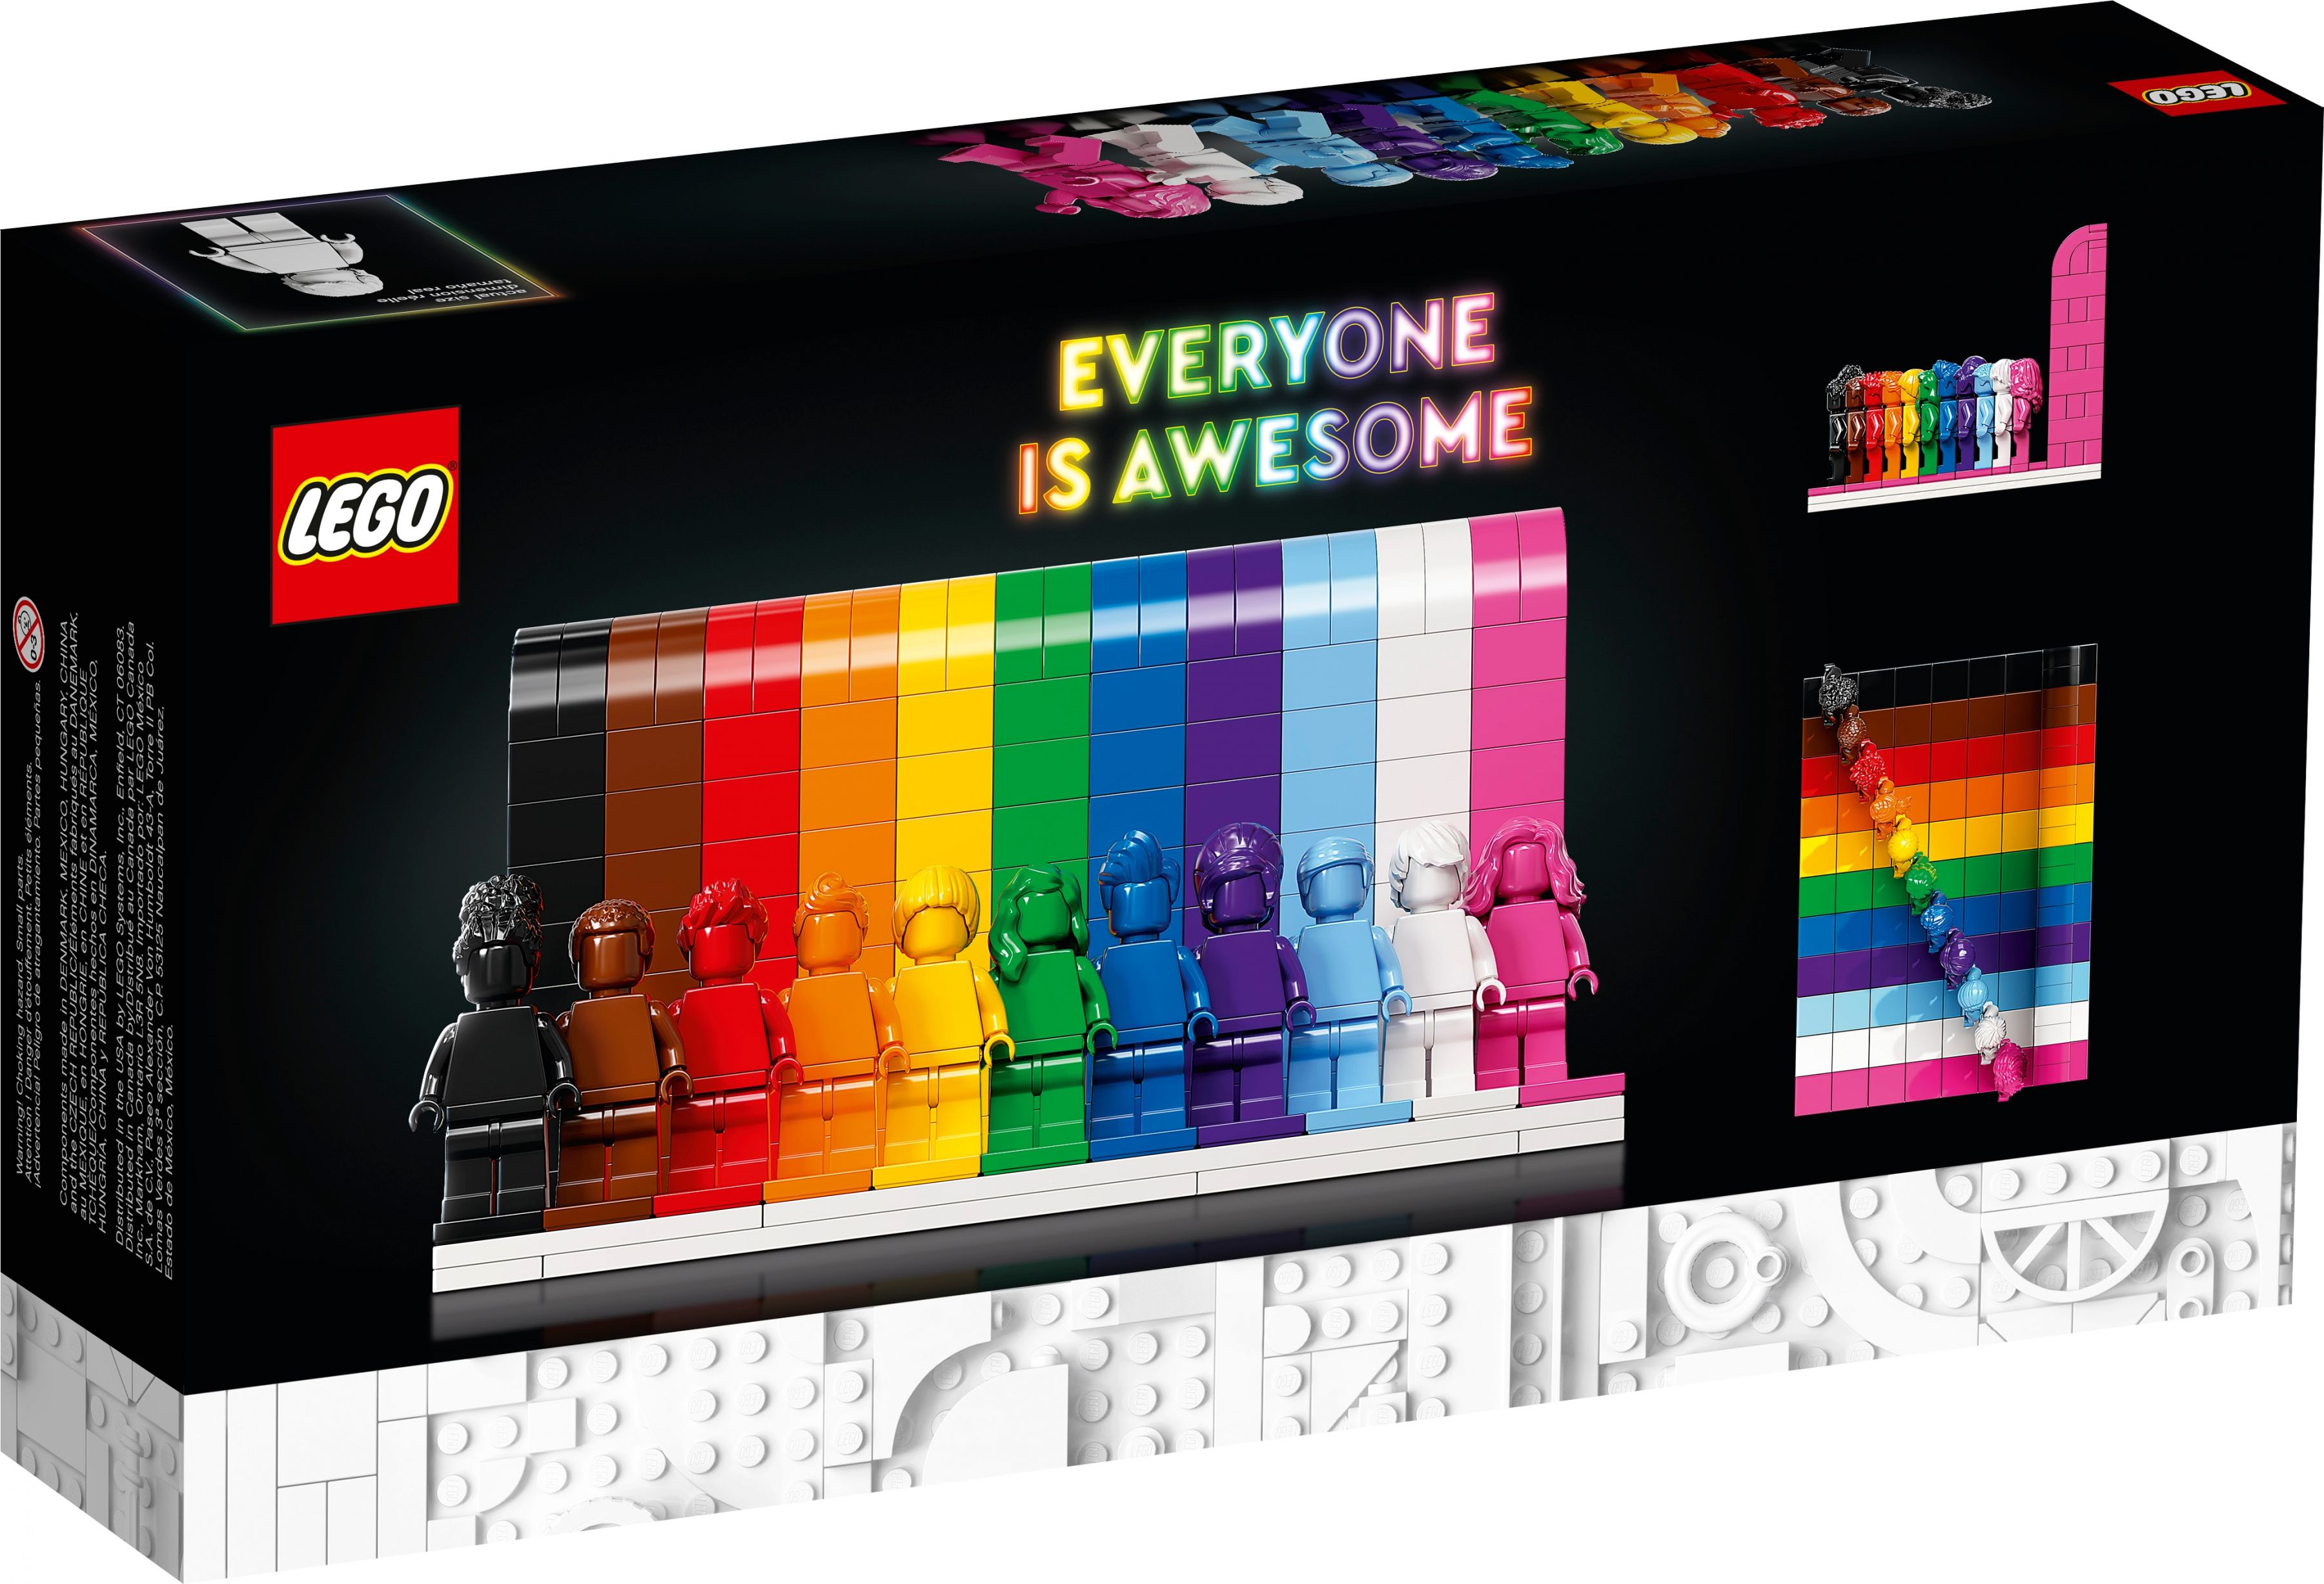 LEGO 40516 Jeder Everyone Awesome Bausatz ist besonders Is